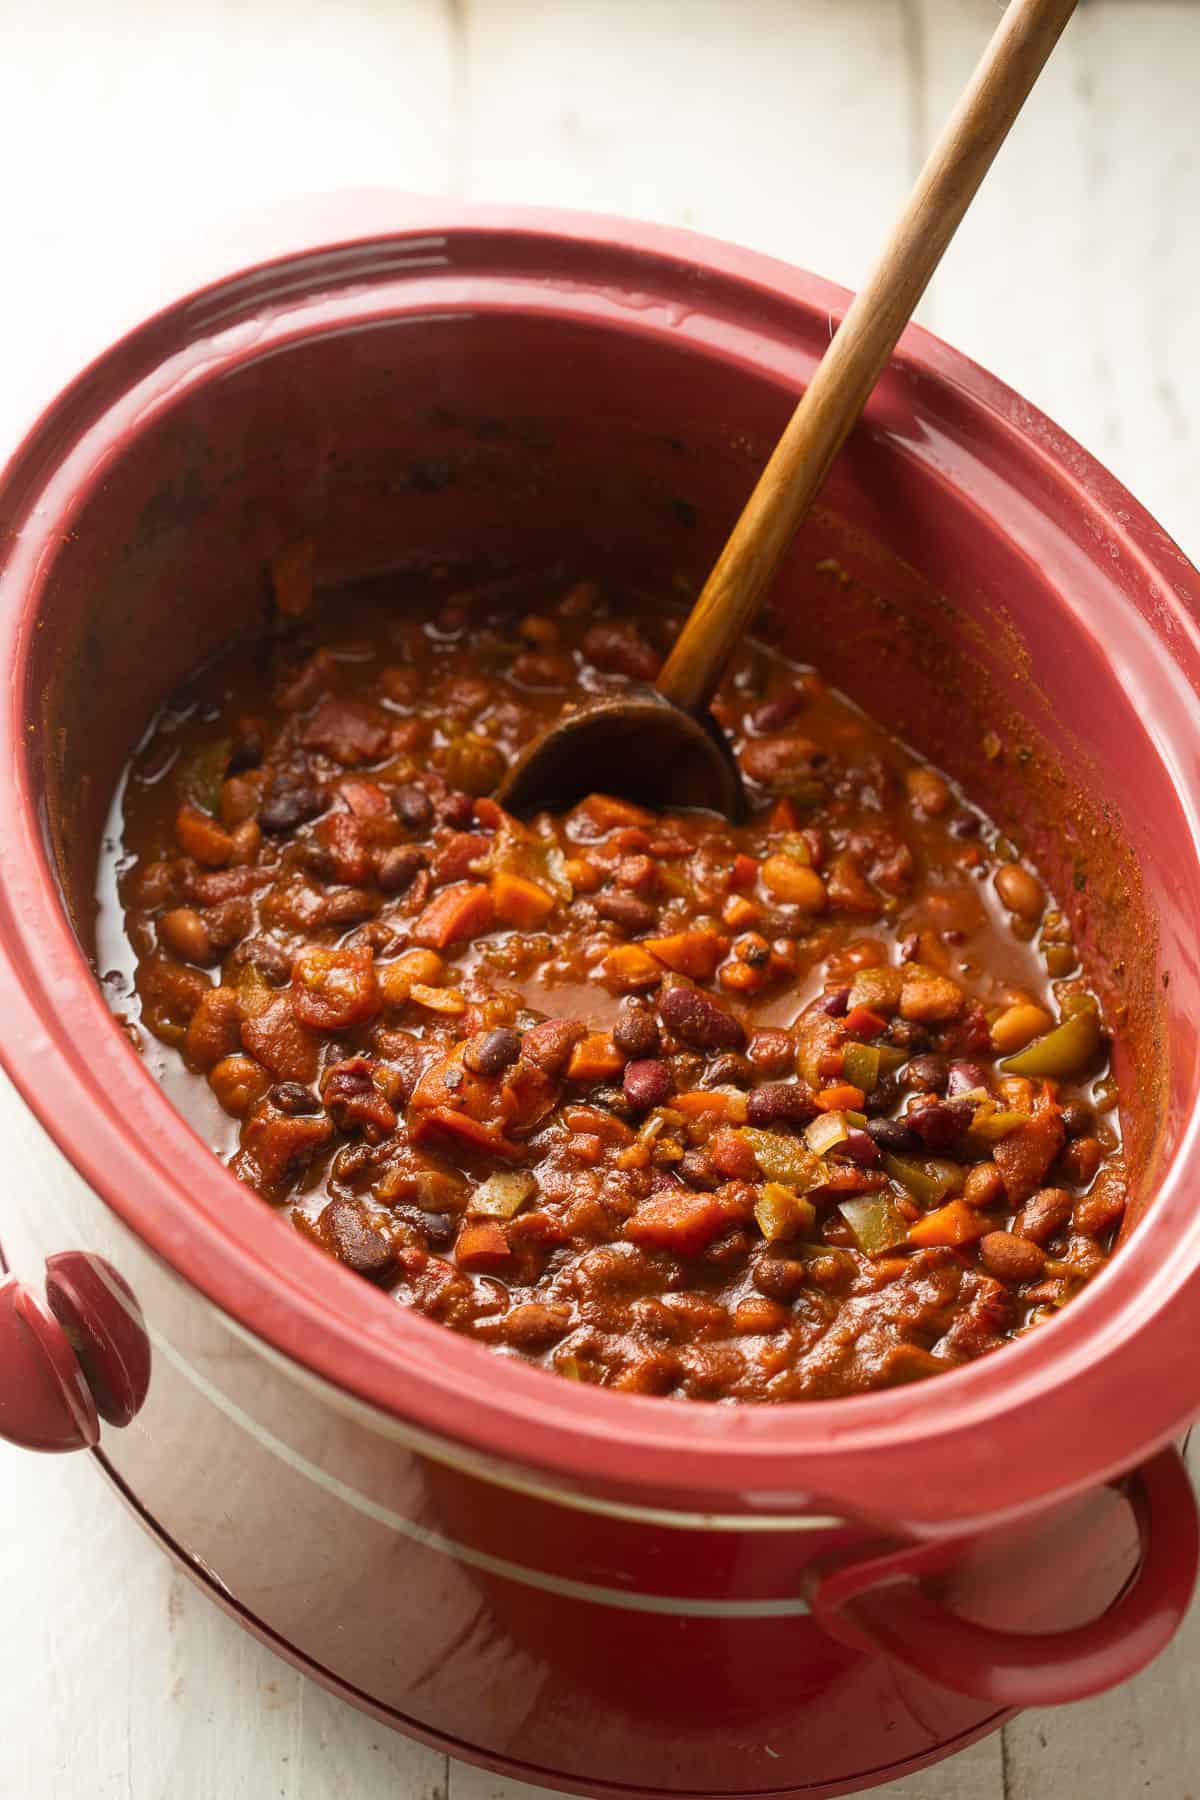 Vegan chili in a crockpot with wooden spoon.